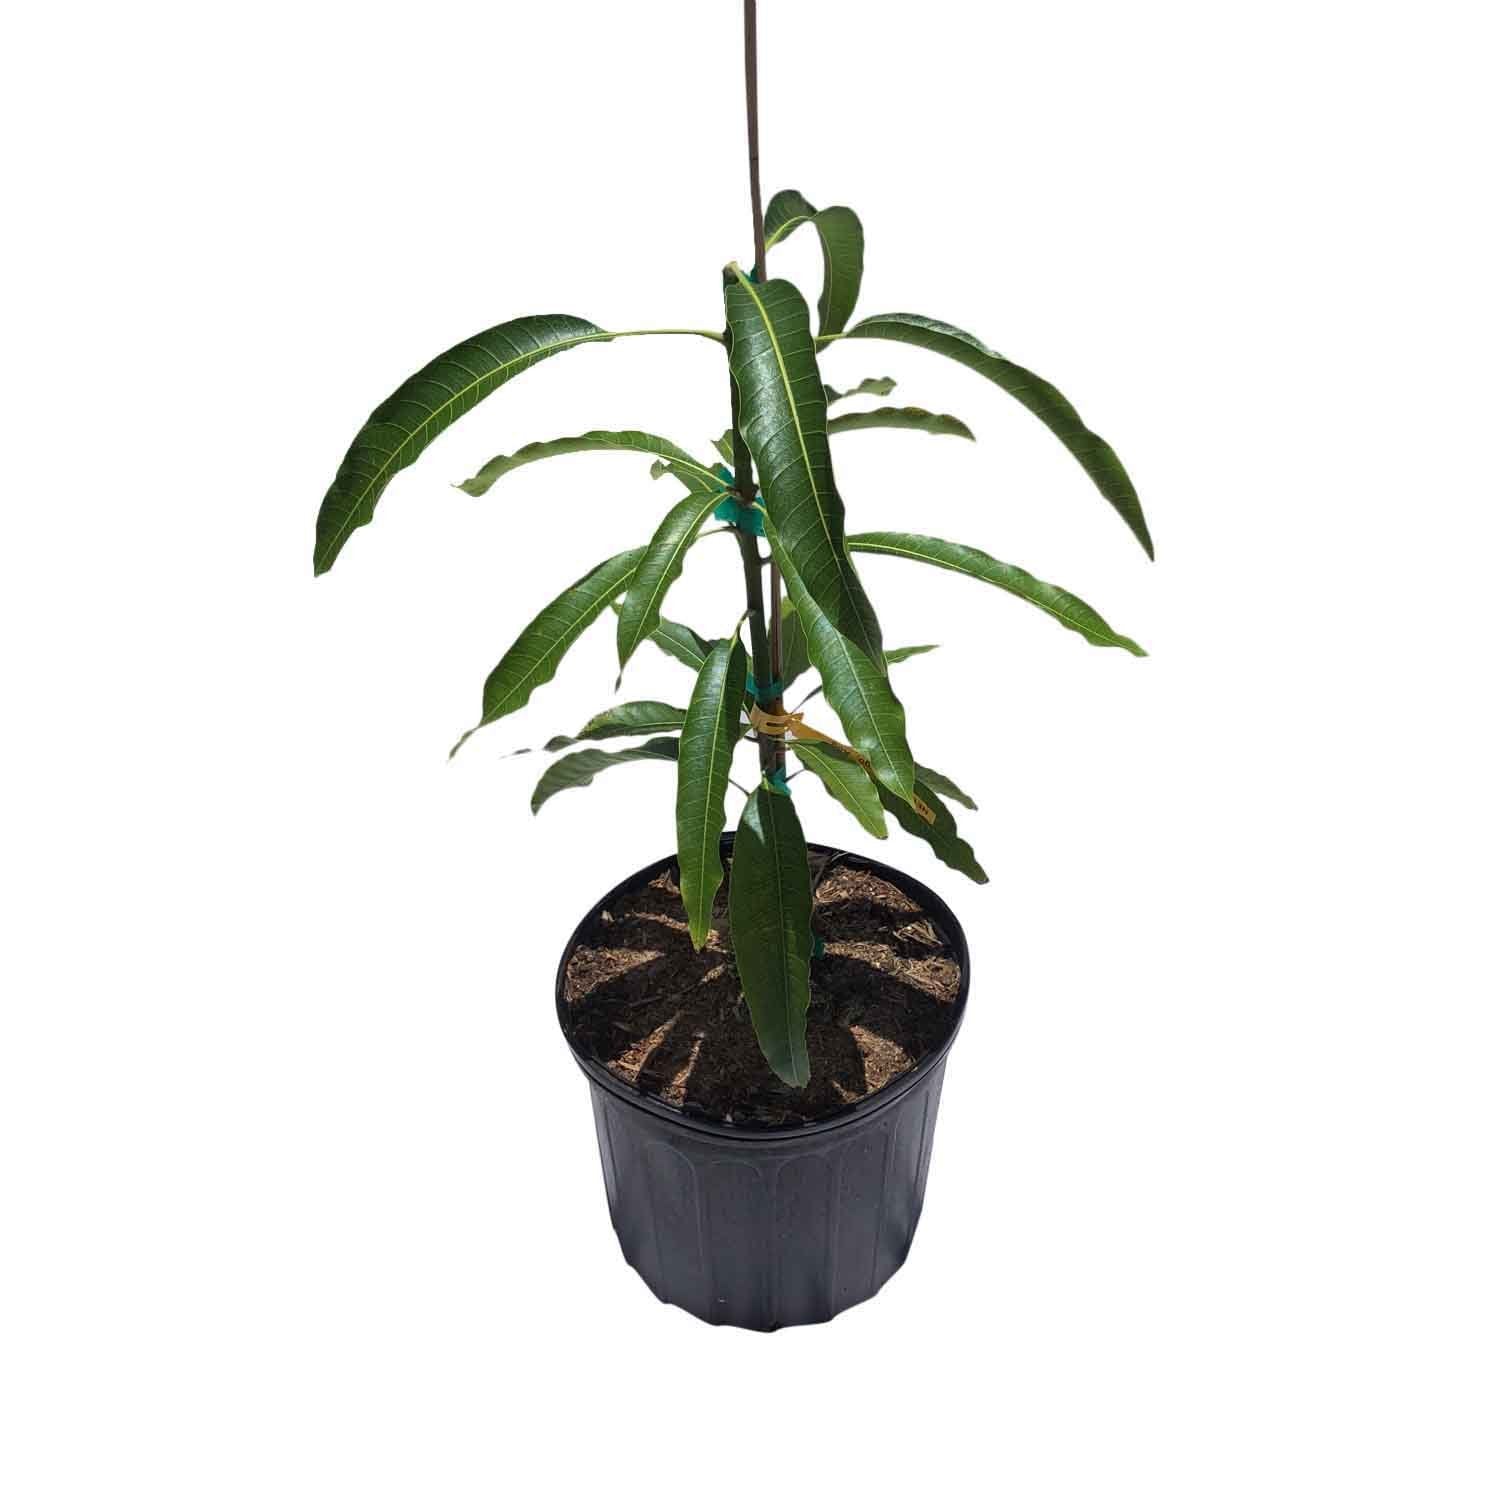 Maha Chanook Mango Tree, Grafted, 3 Gal Container from Florida